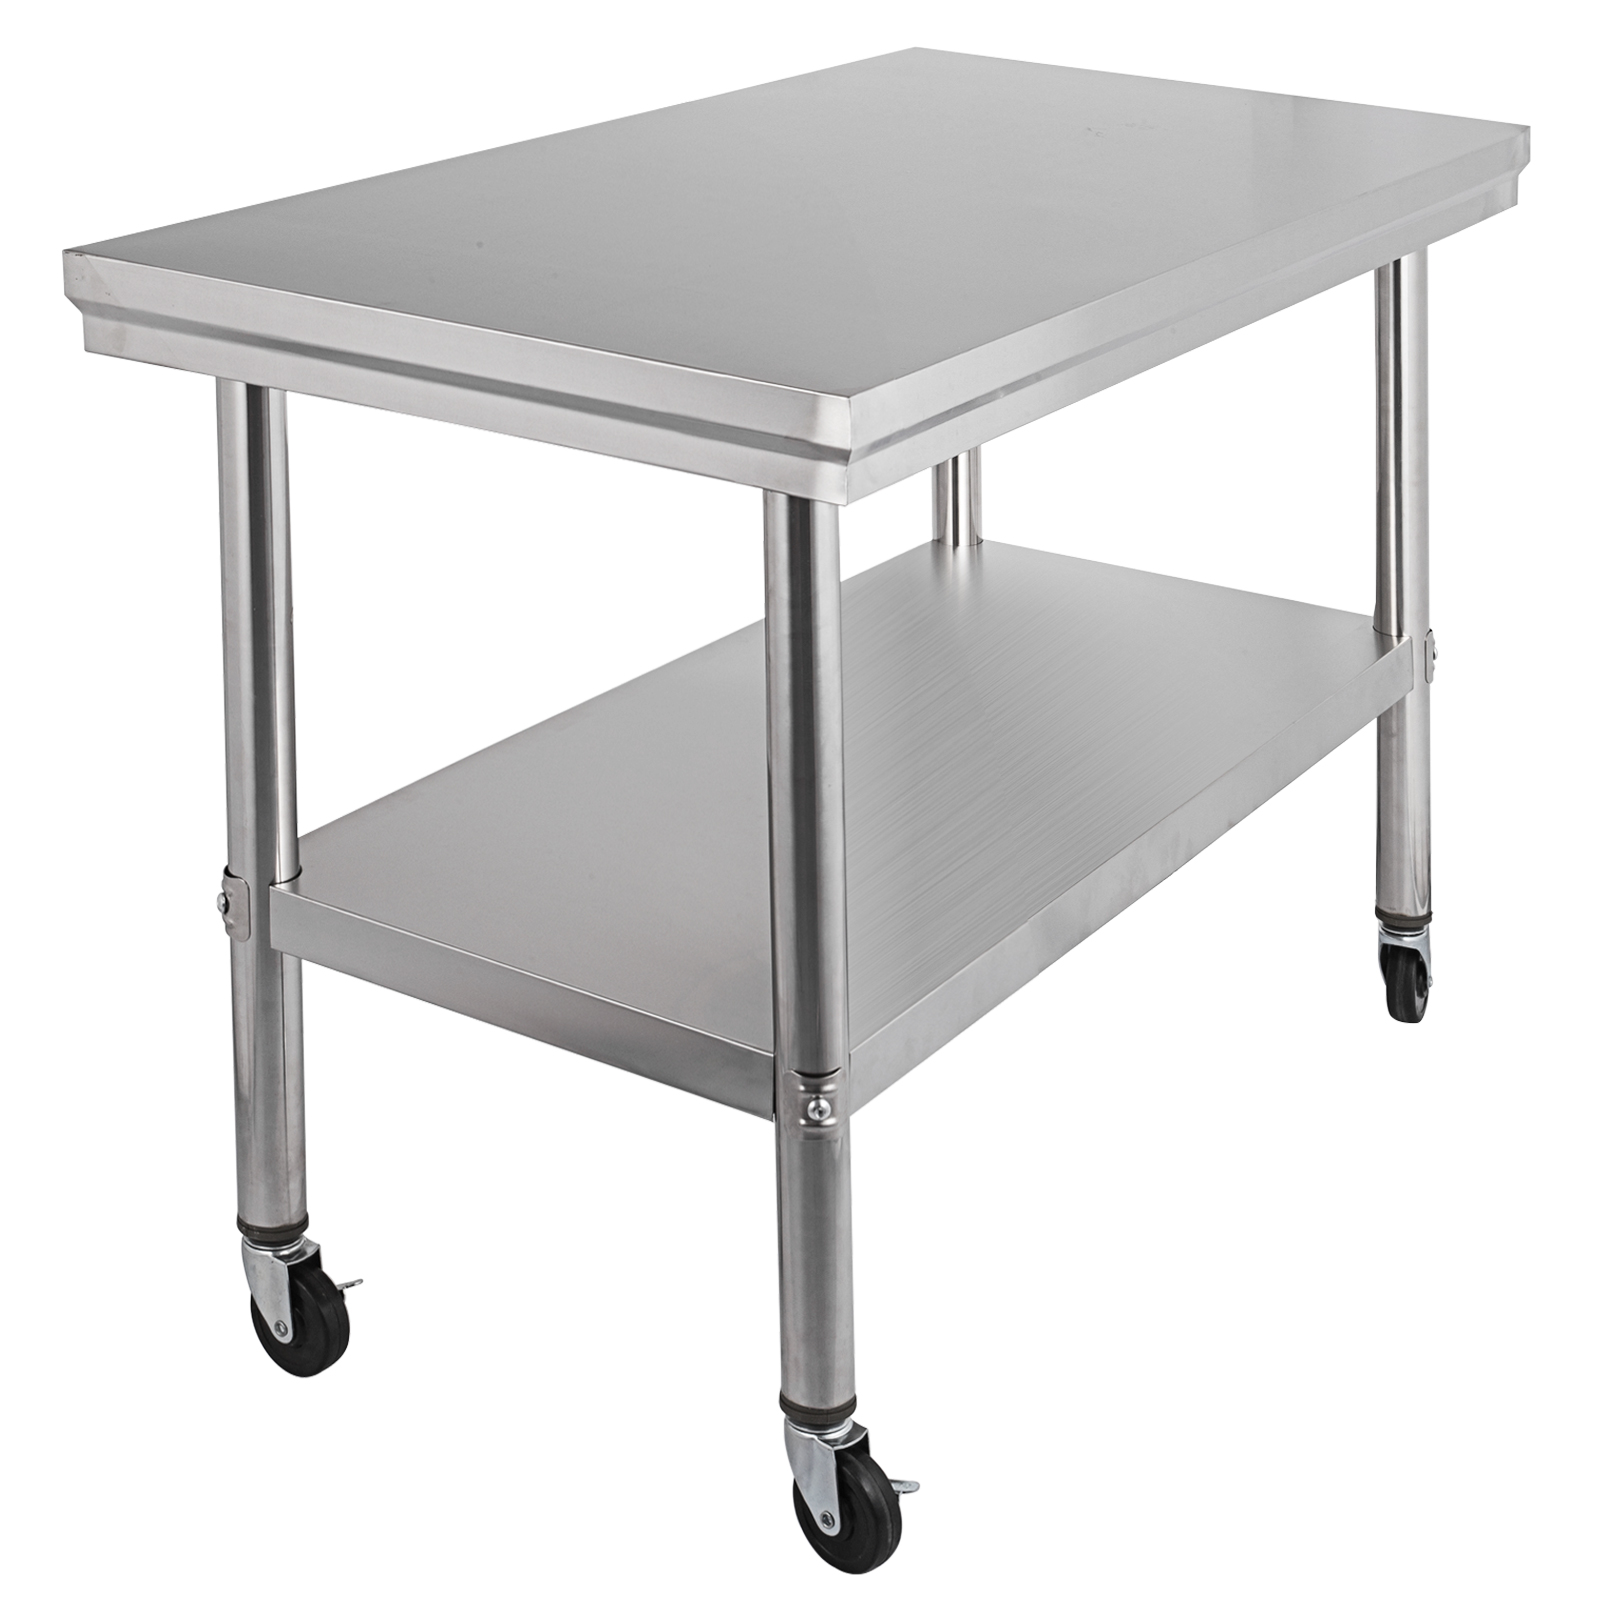 Commercial 30" x 24" Stainless Steel Work Prep Table With 4 Wheels Stainless Steel Work Table On Wheels